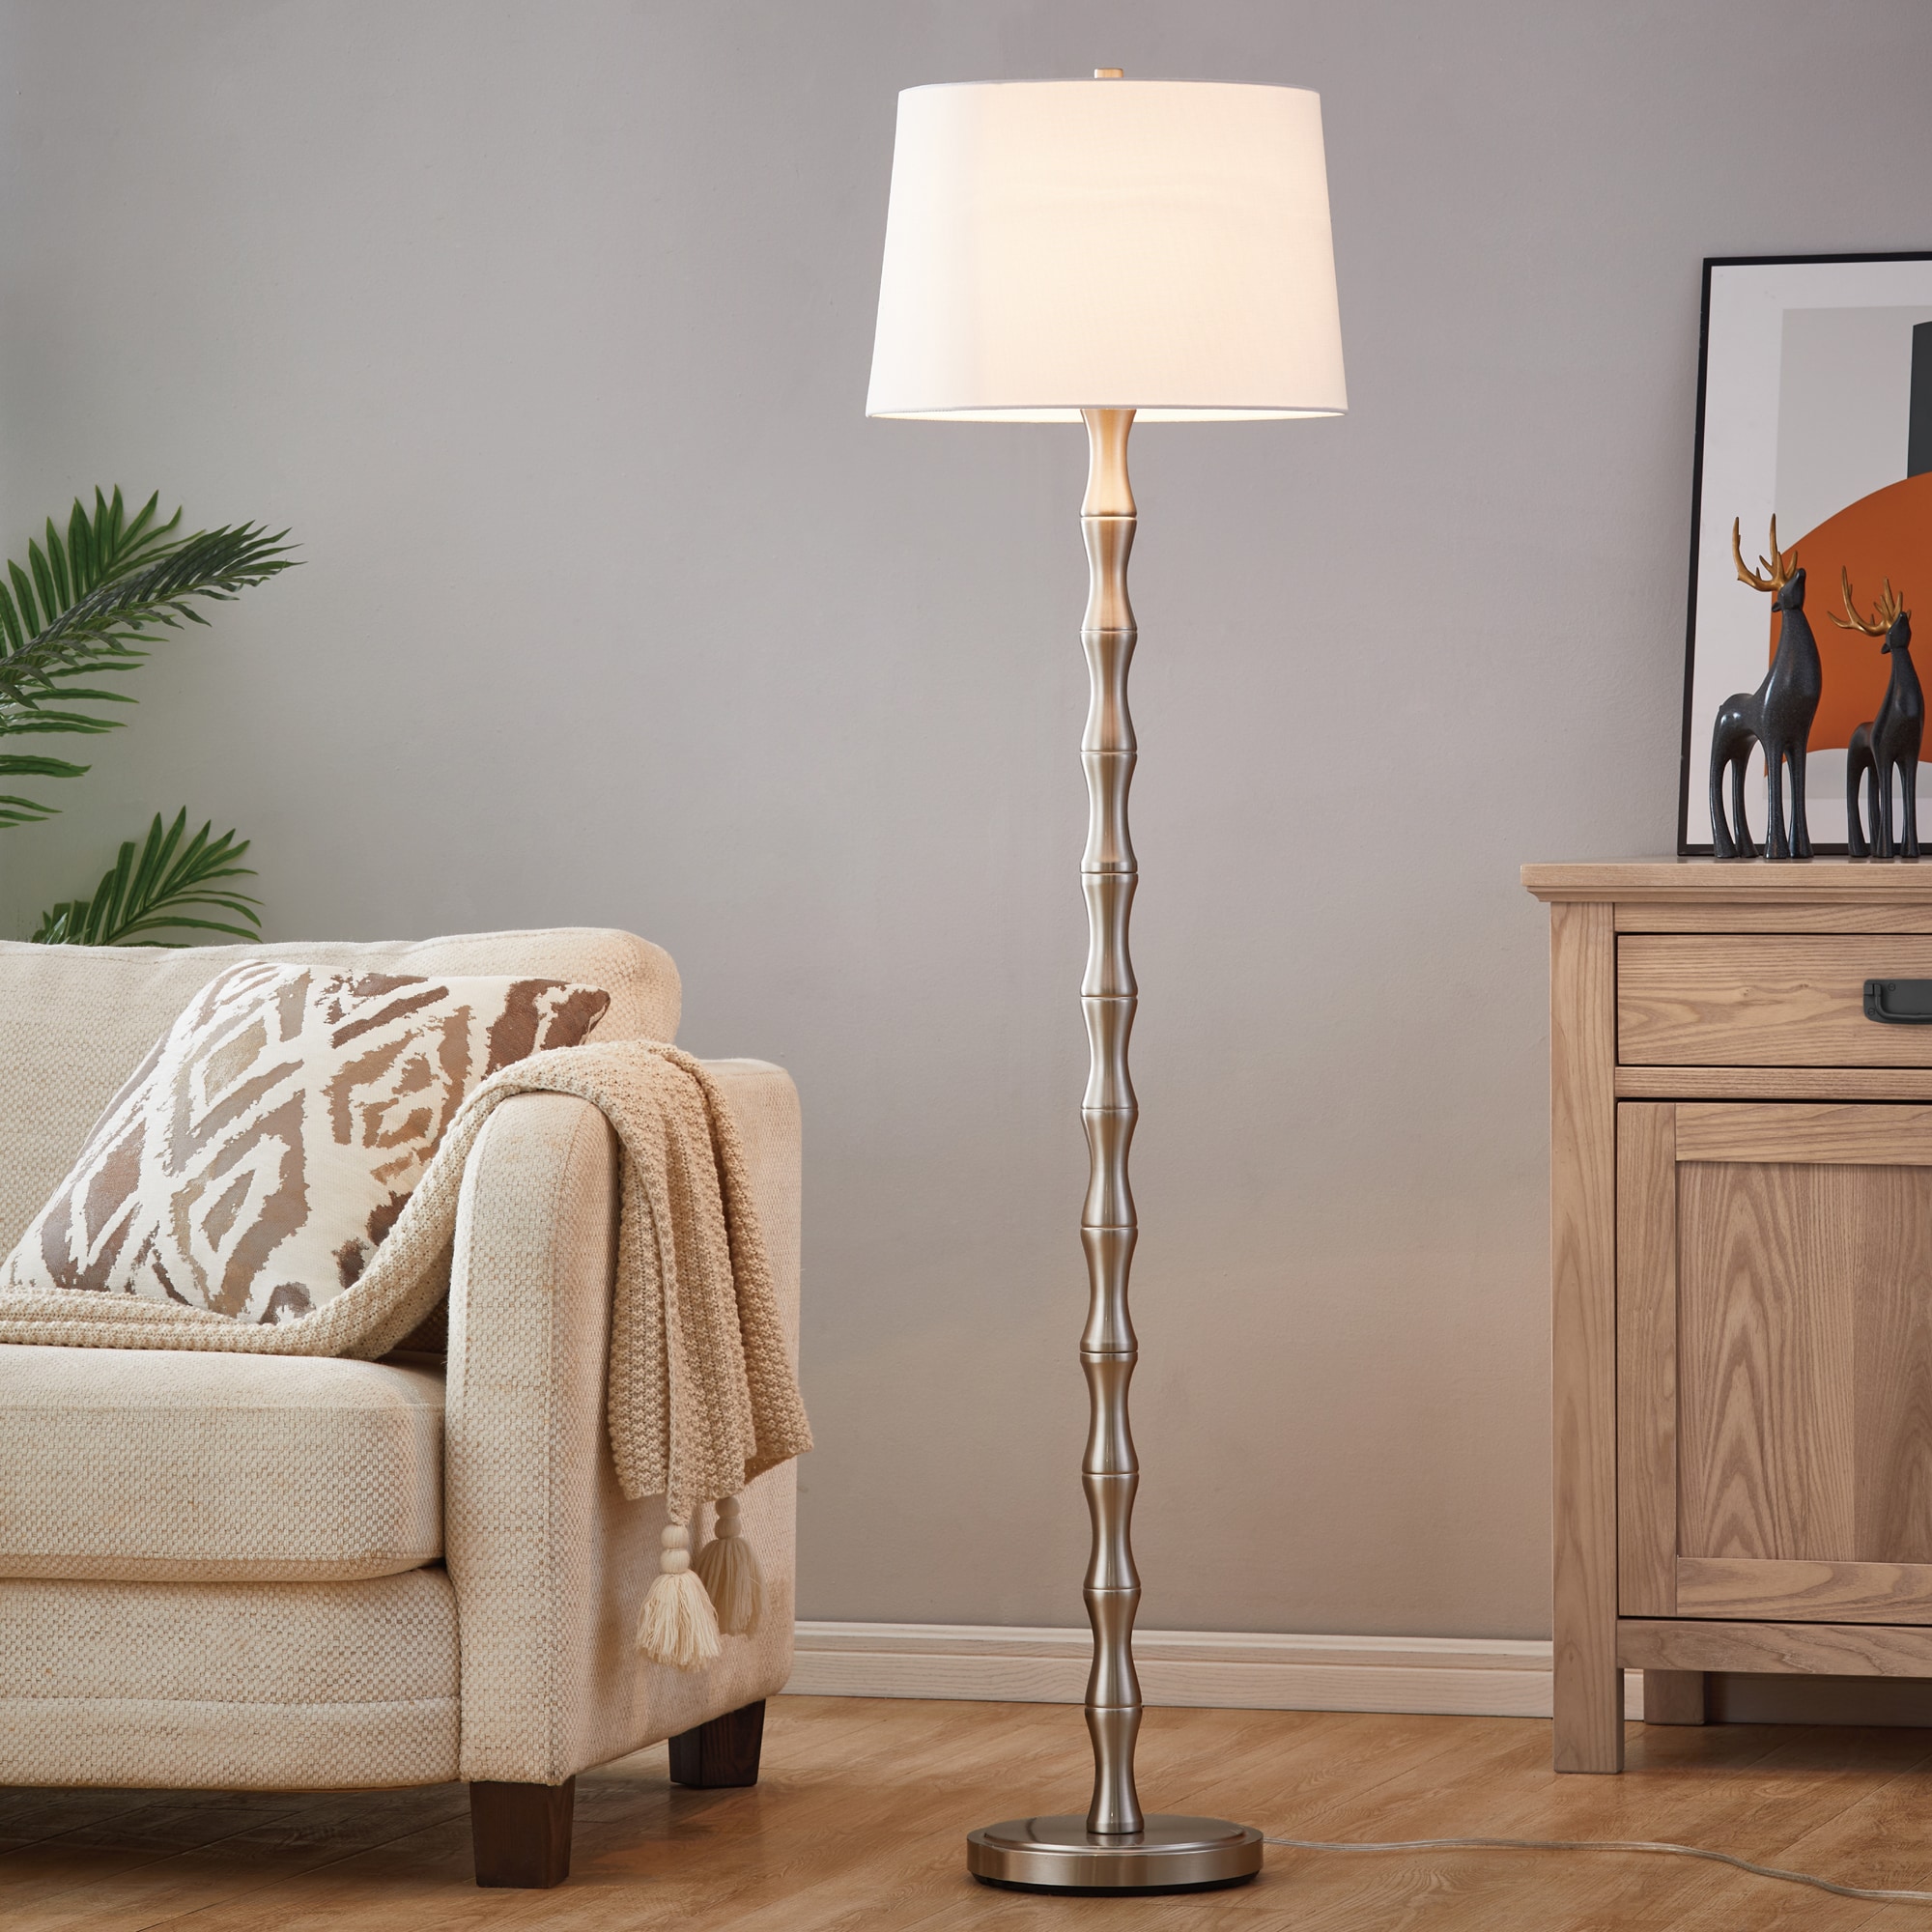 KAWOTI 61 in. Brushed Nickel Floor Lamp with White Fabric Shade in the ...